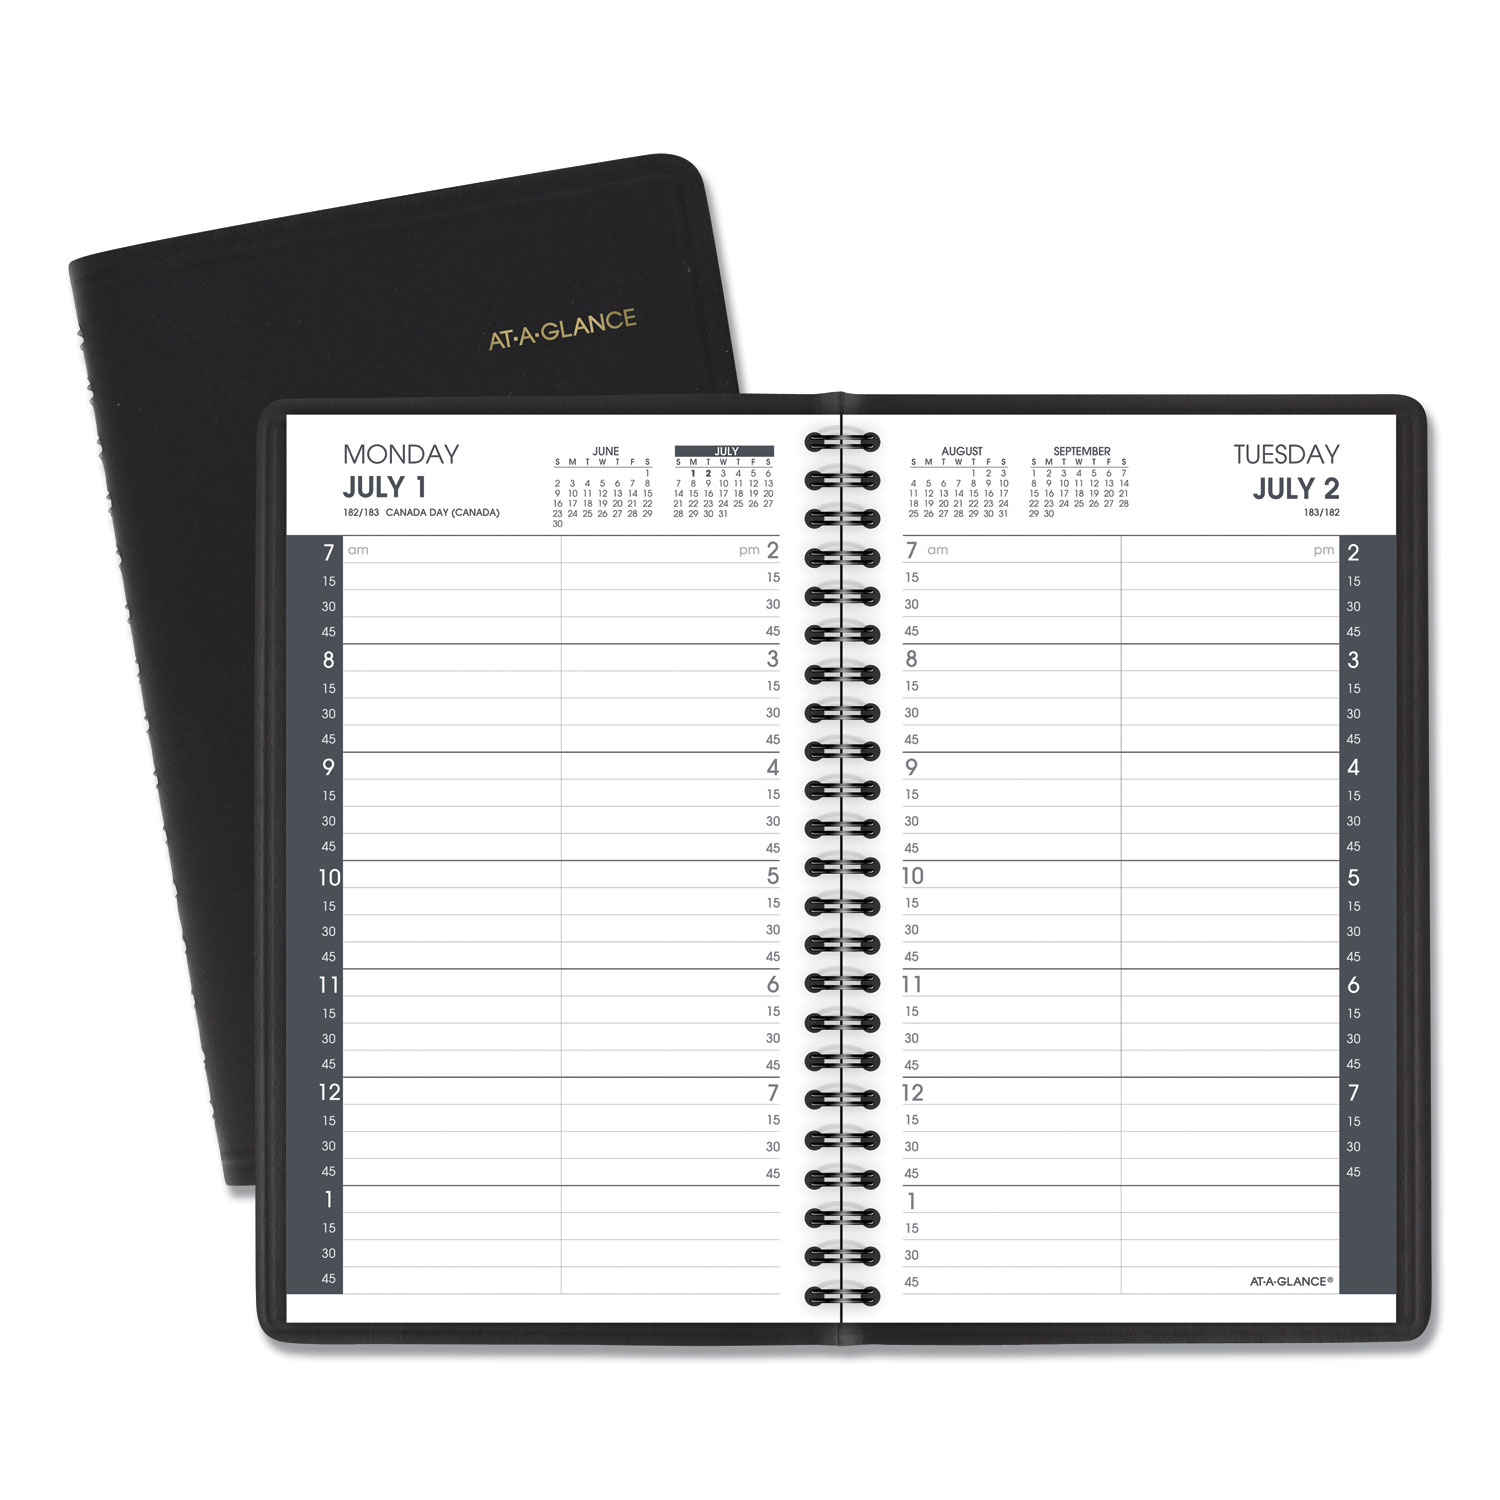 Daily Appointment Book with 15-Minute Appointments, 8 x 4 7/8, Black, 2019-2020